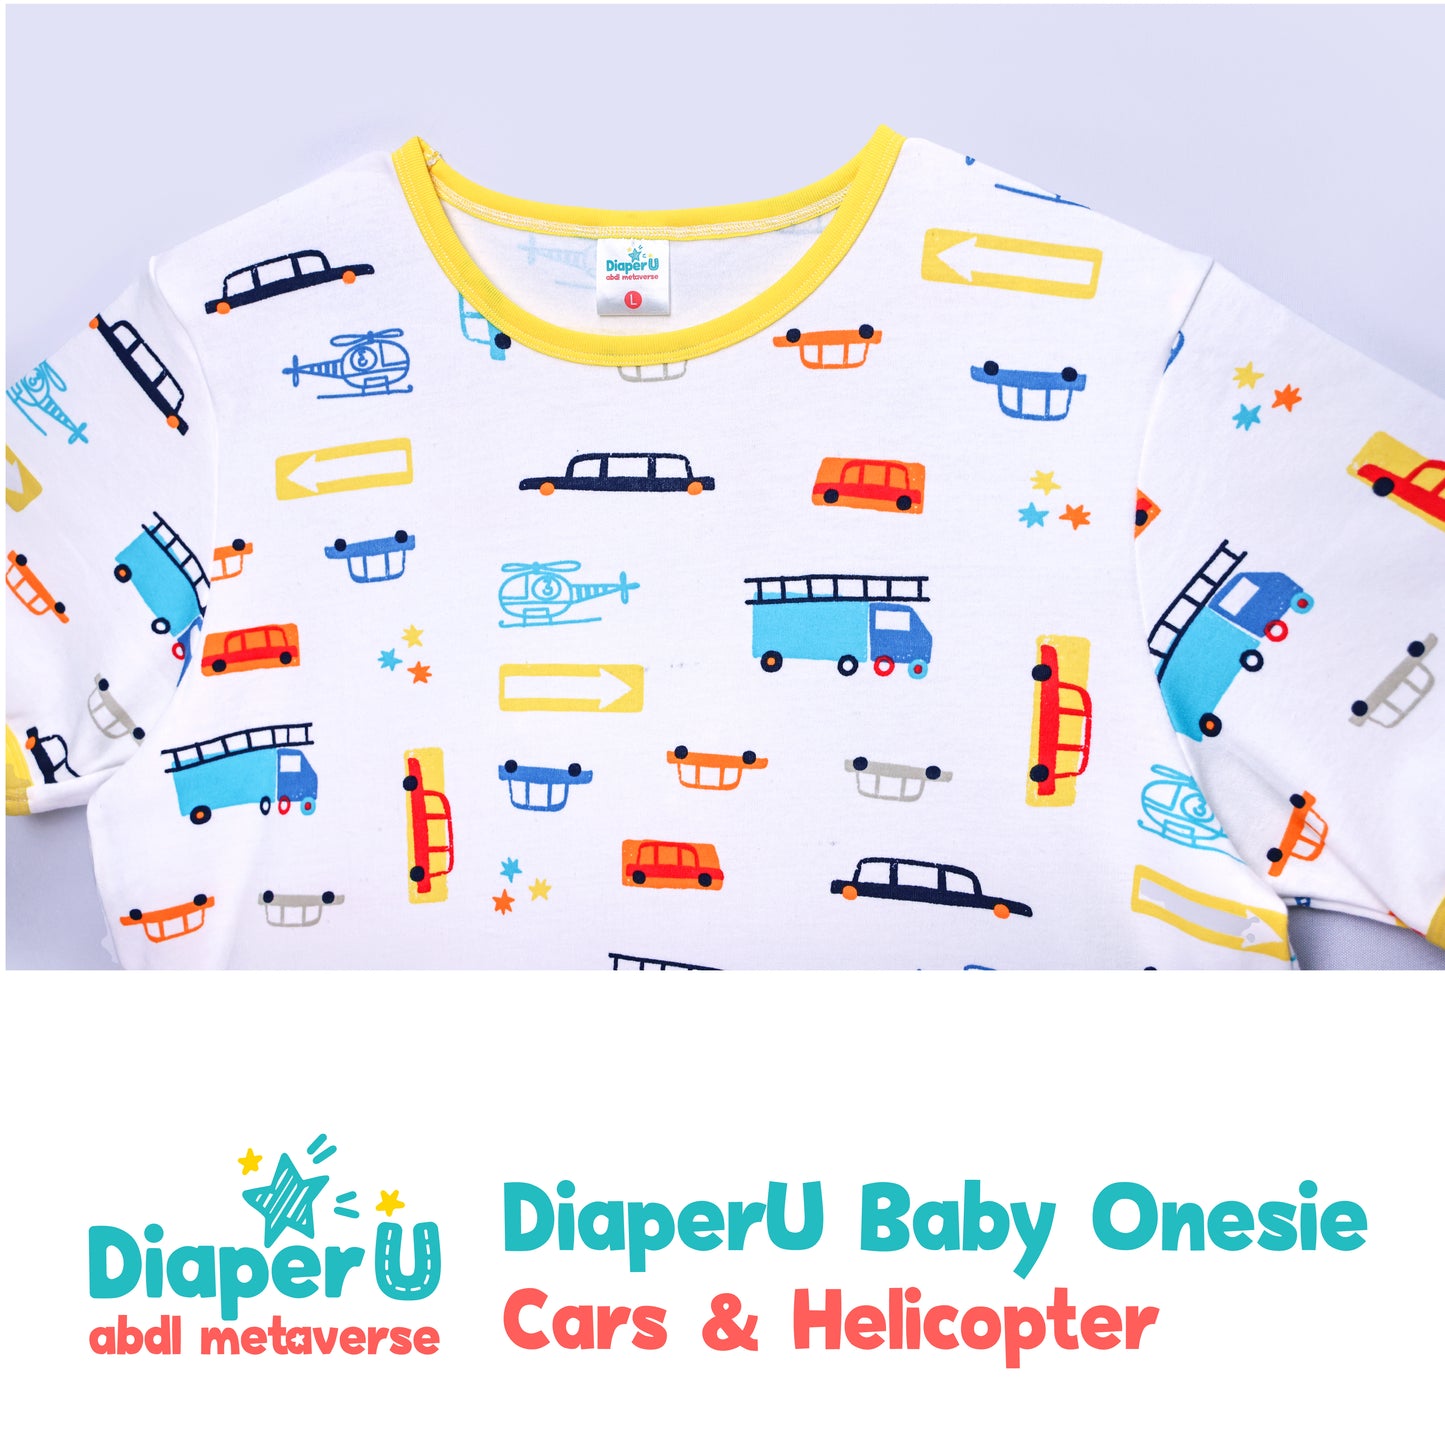 ABDL Onesie - Cars & Helicopter